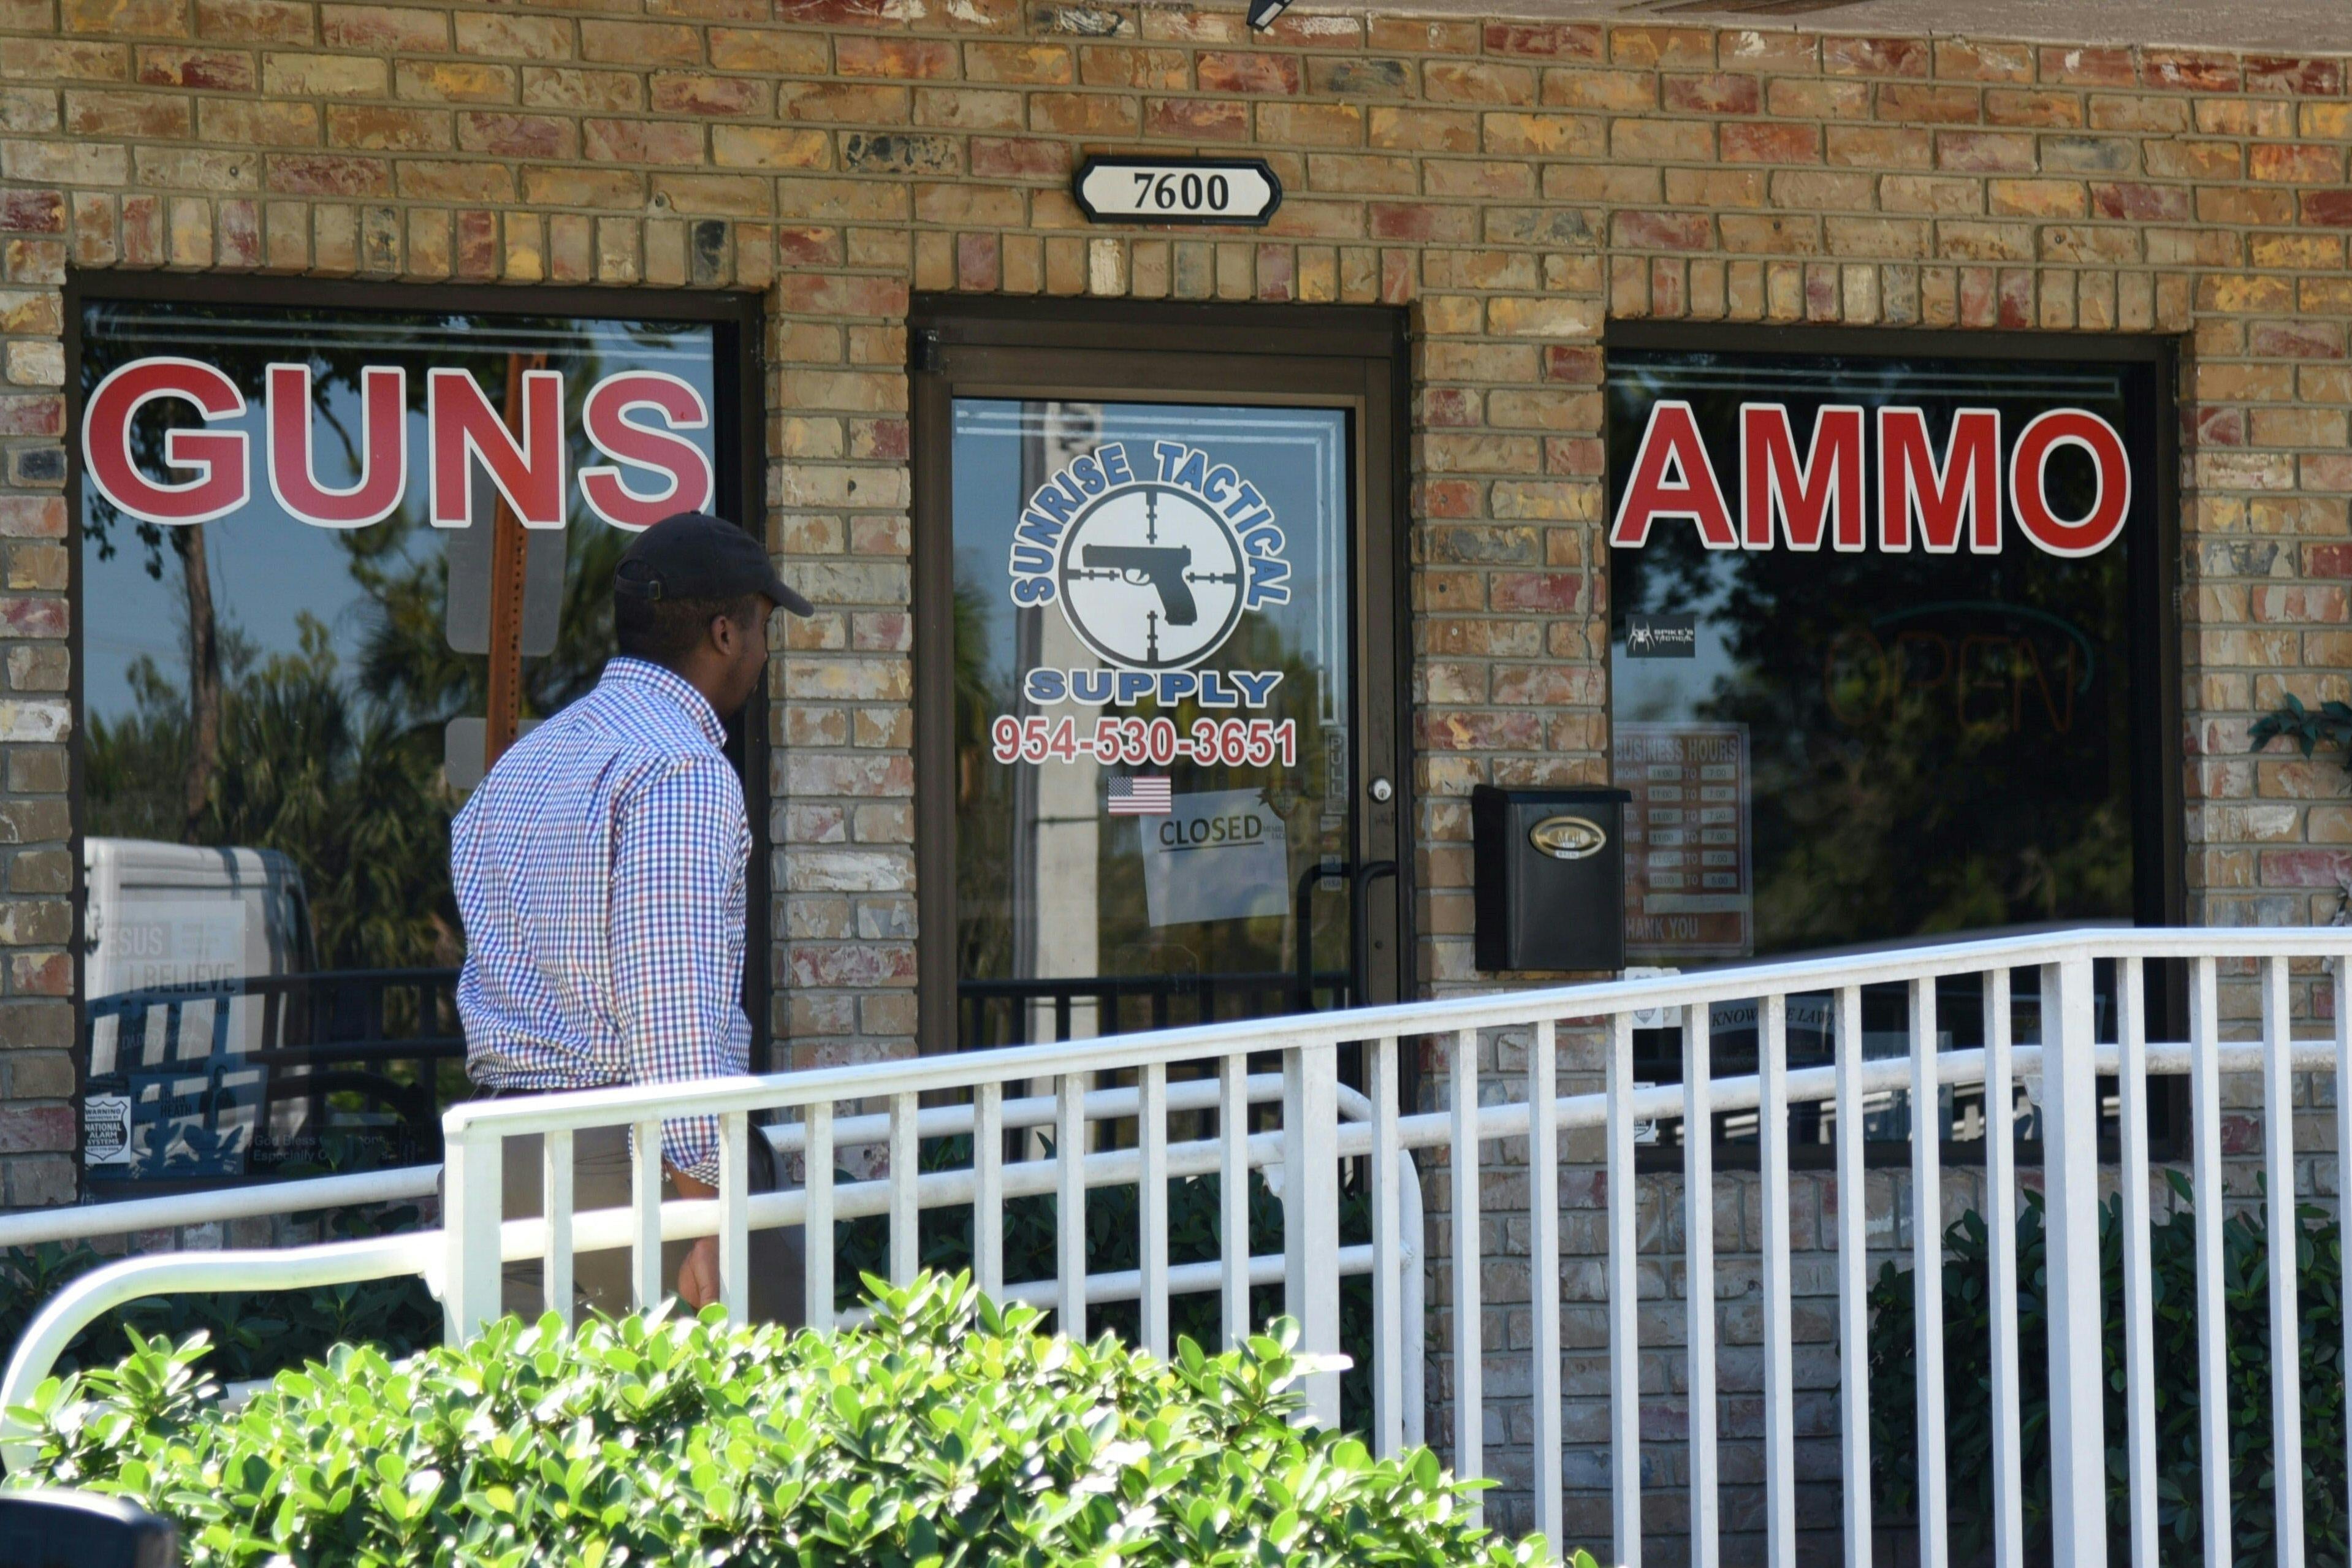 19-year-old Nikolas Cruz bought his AR-15 at the Sunrise Tactical Supply store in Florida.  